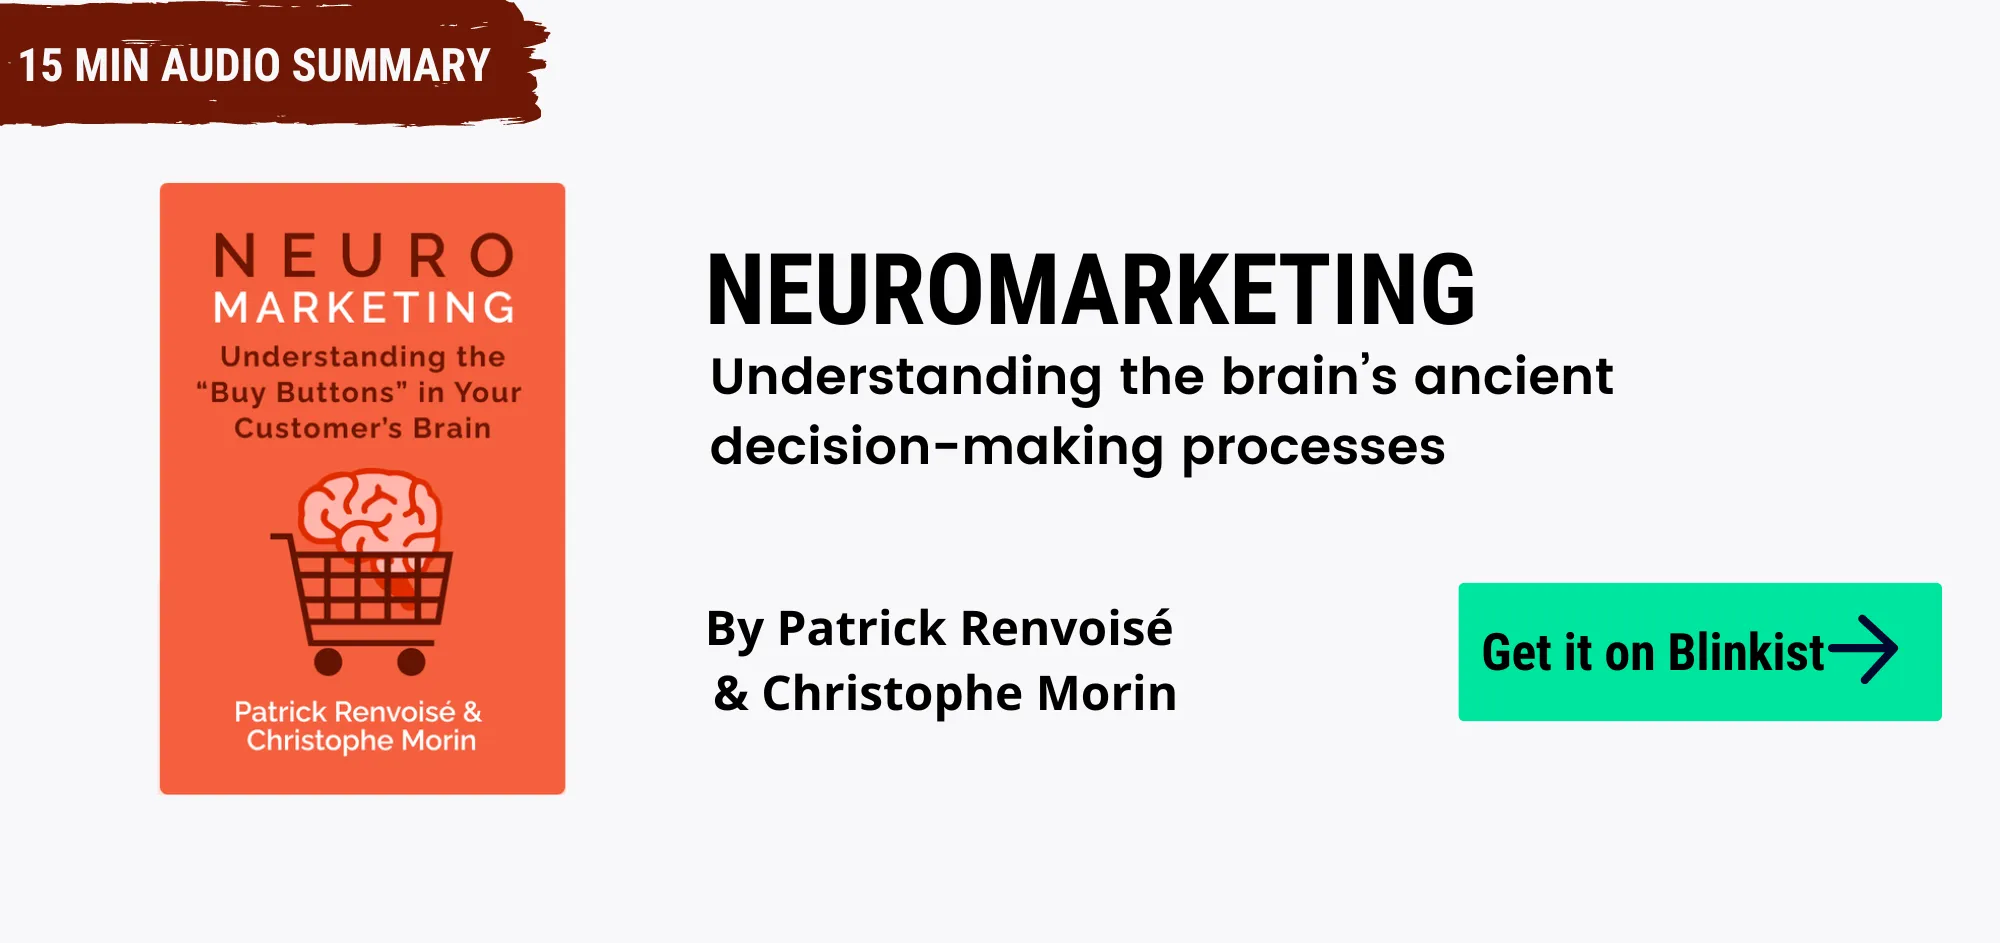 Neuromarketing Understanding the brains ancient decision making processes